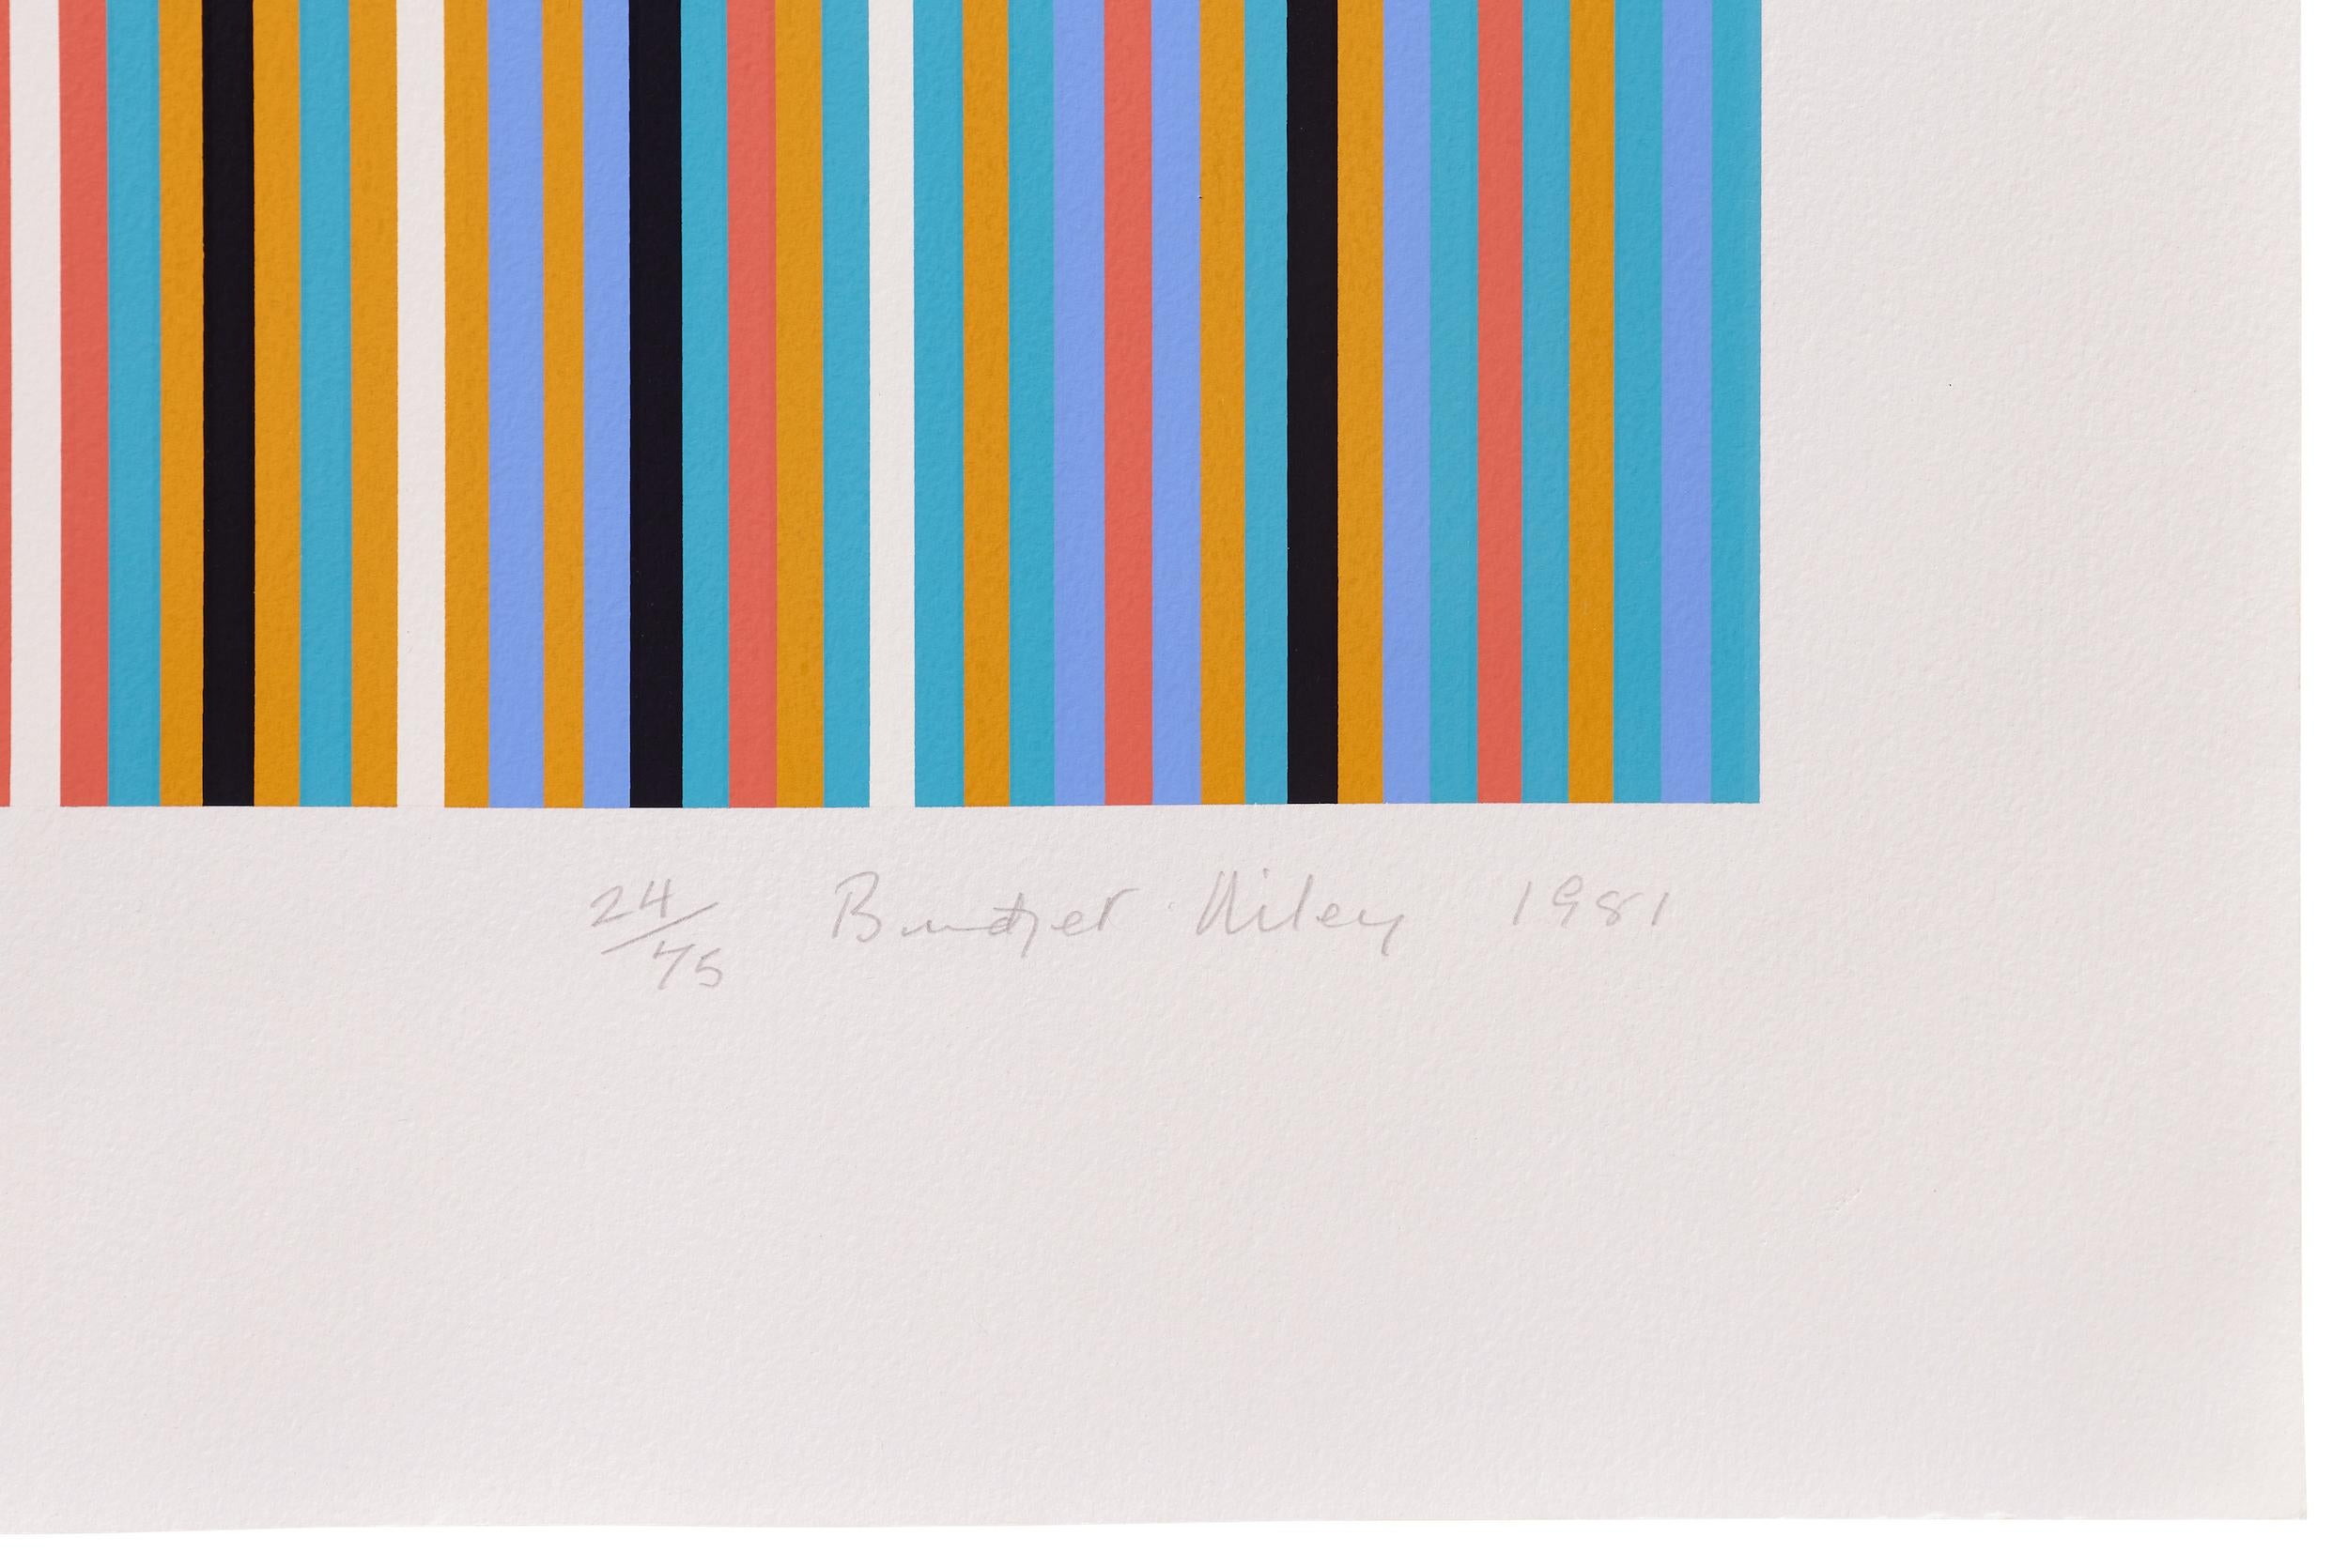 RA 2, 1981
Bridget Riley

Screenprint in colours, on wove
Signed, dated, titled, annotated, numbered from the edition of 75
Printed by Artizan Editions, Hove
Image: 87.2 × 76.4 cm (34.3 × 30.1 in)
Sheet: 106.6 × 93.2 cm (42 × 36.7 in)
Literature: